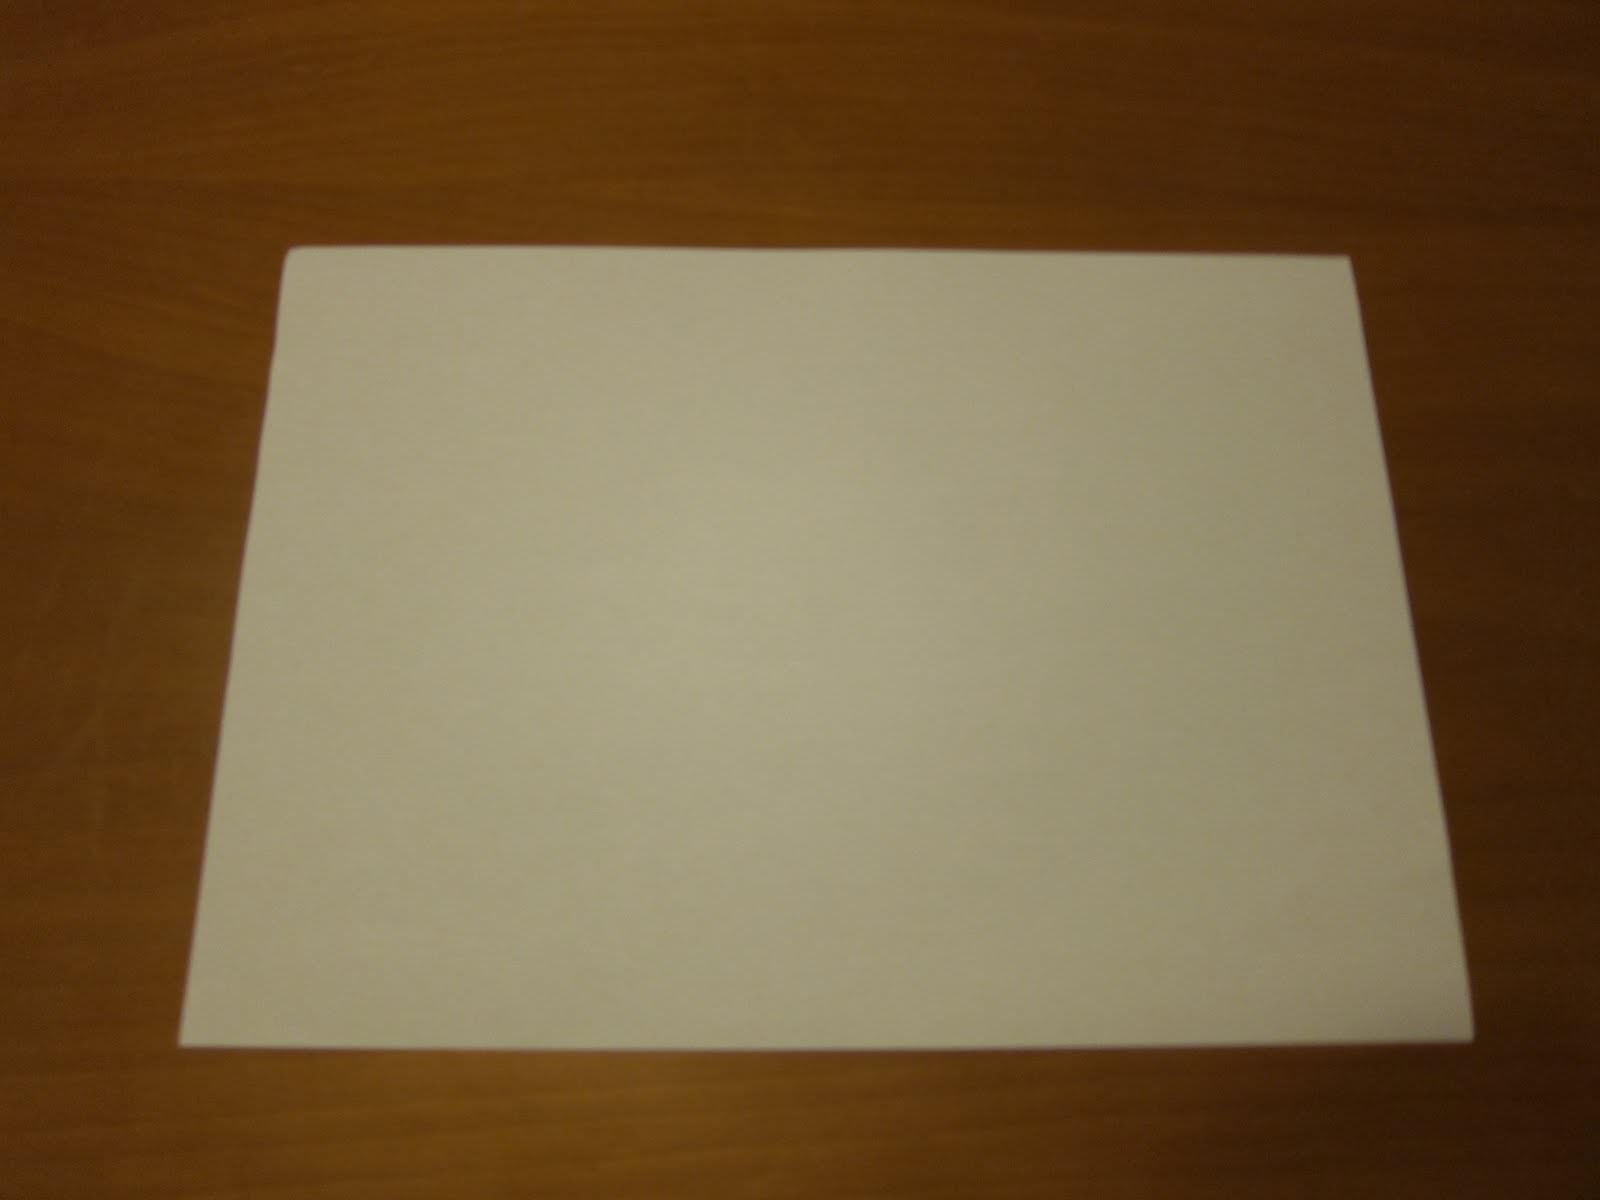 Put your sheet of paper in a flat surface